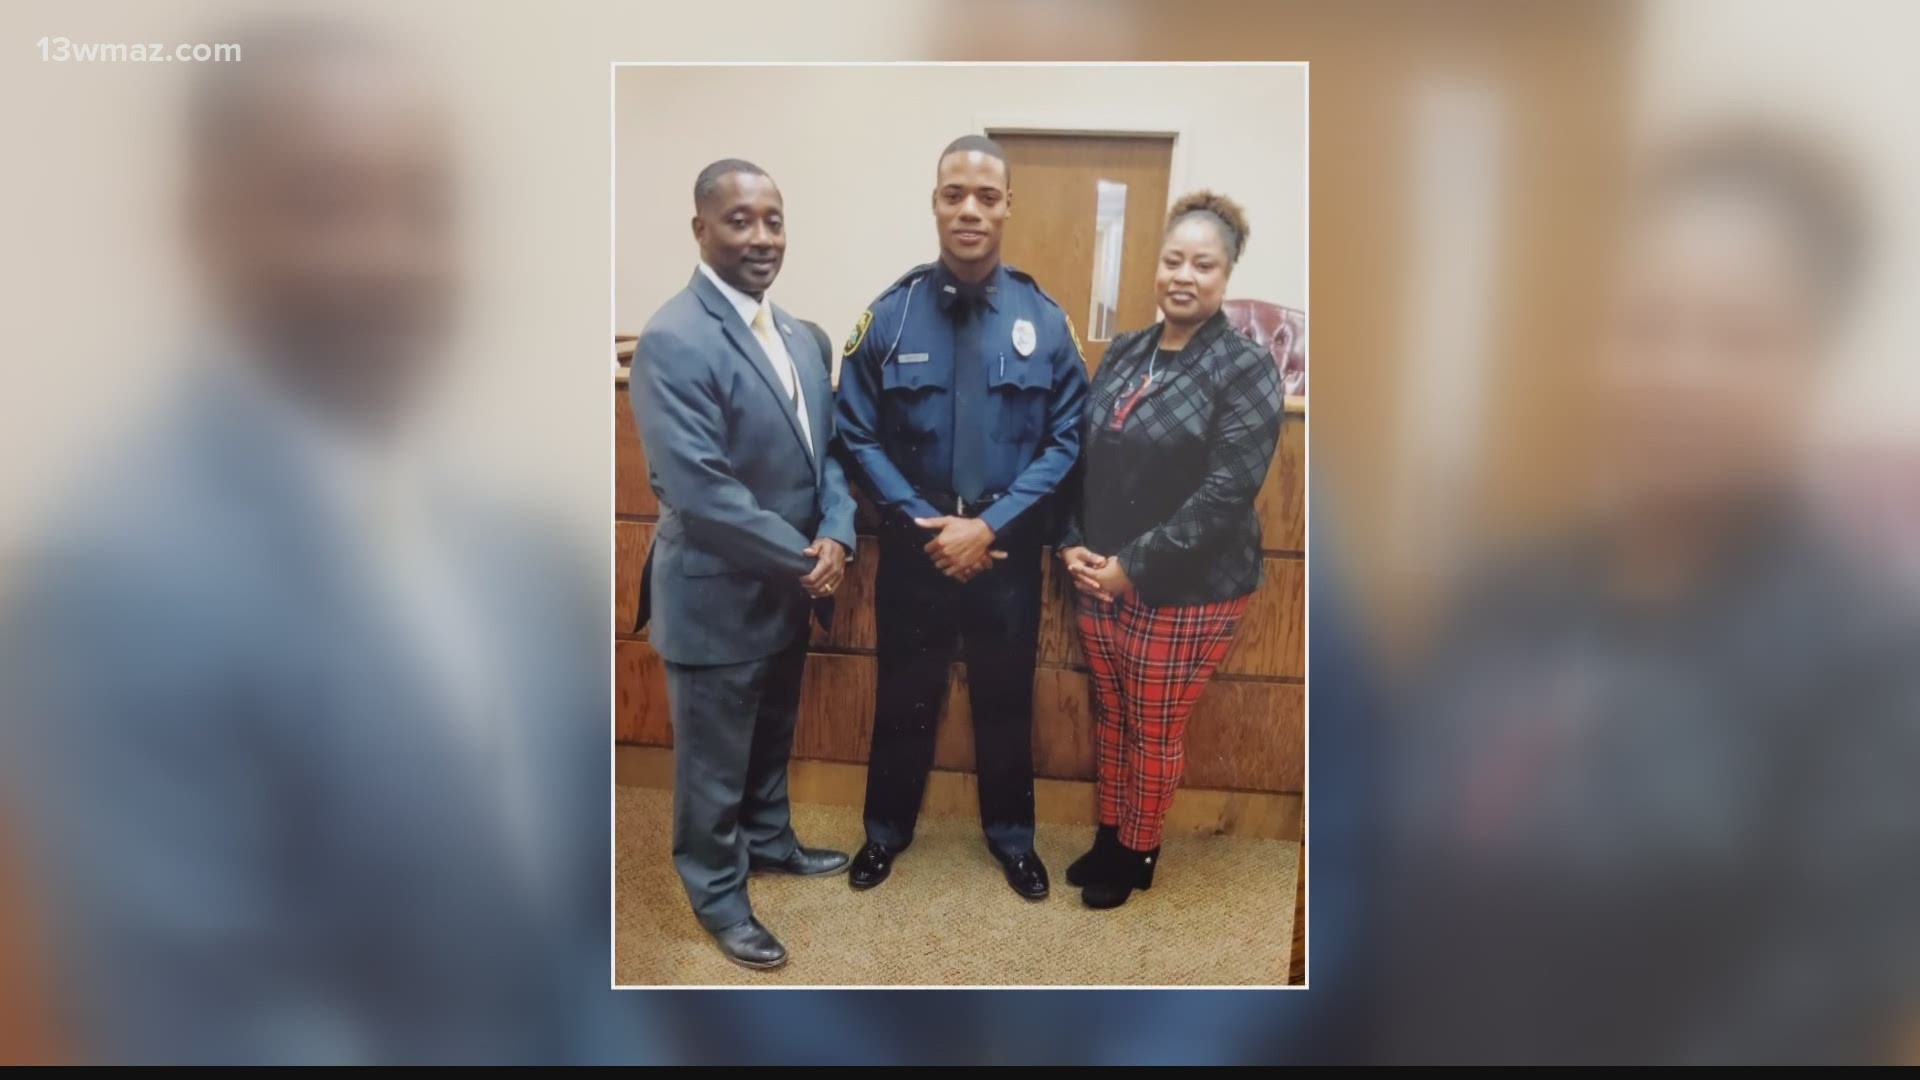 Officer Michael Bostic ended up catching the virus, which put him out of work for more than three weeks.